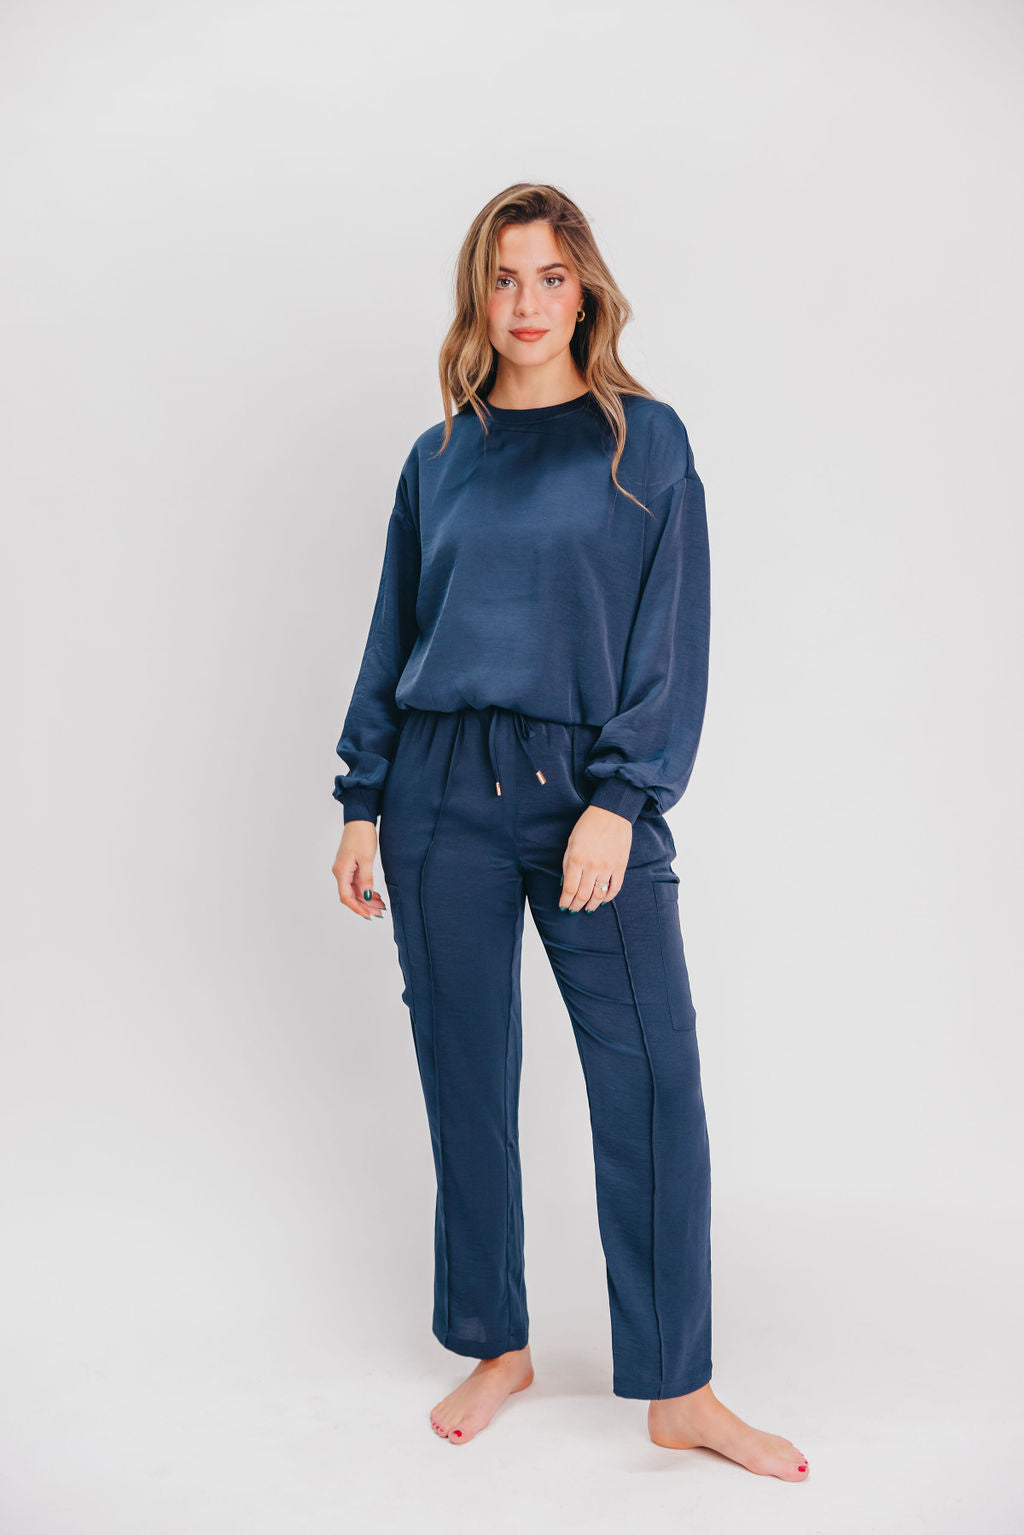 Sonny Silky Pintucked Cargo-Style Pants in Navy (top sold separately)